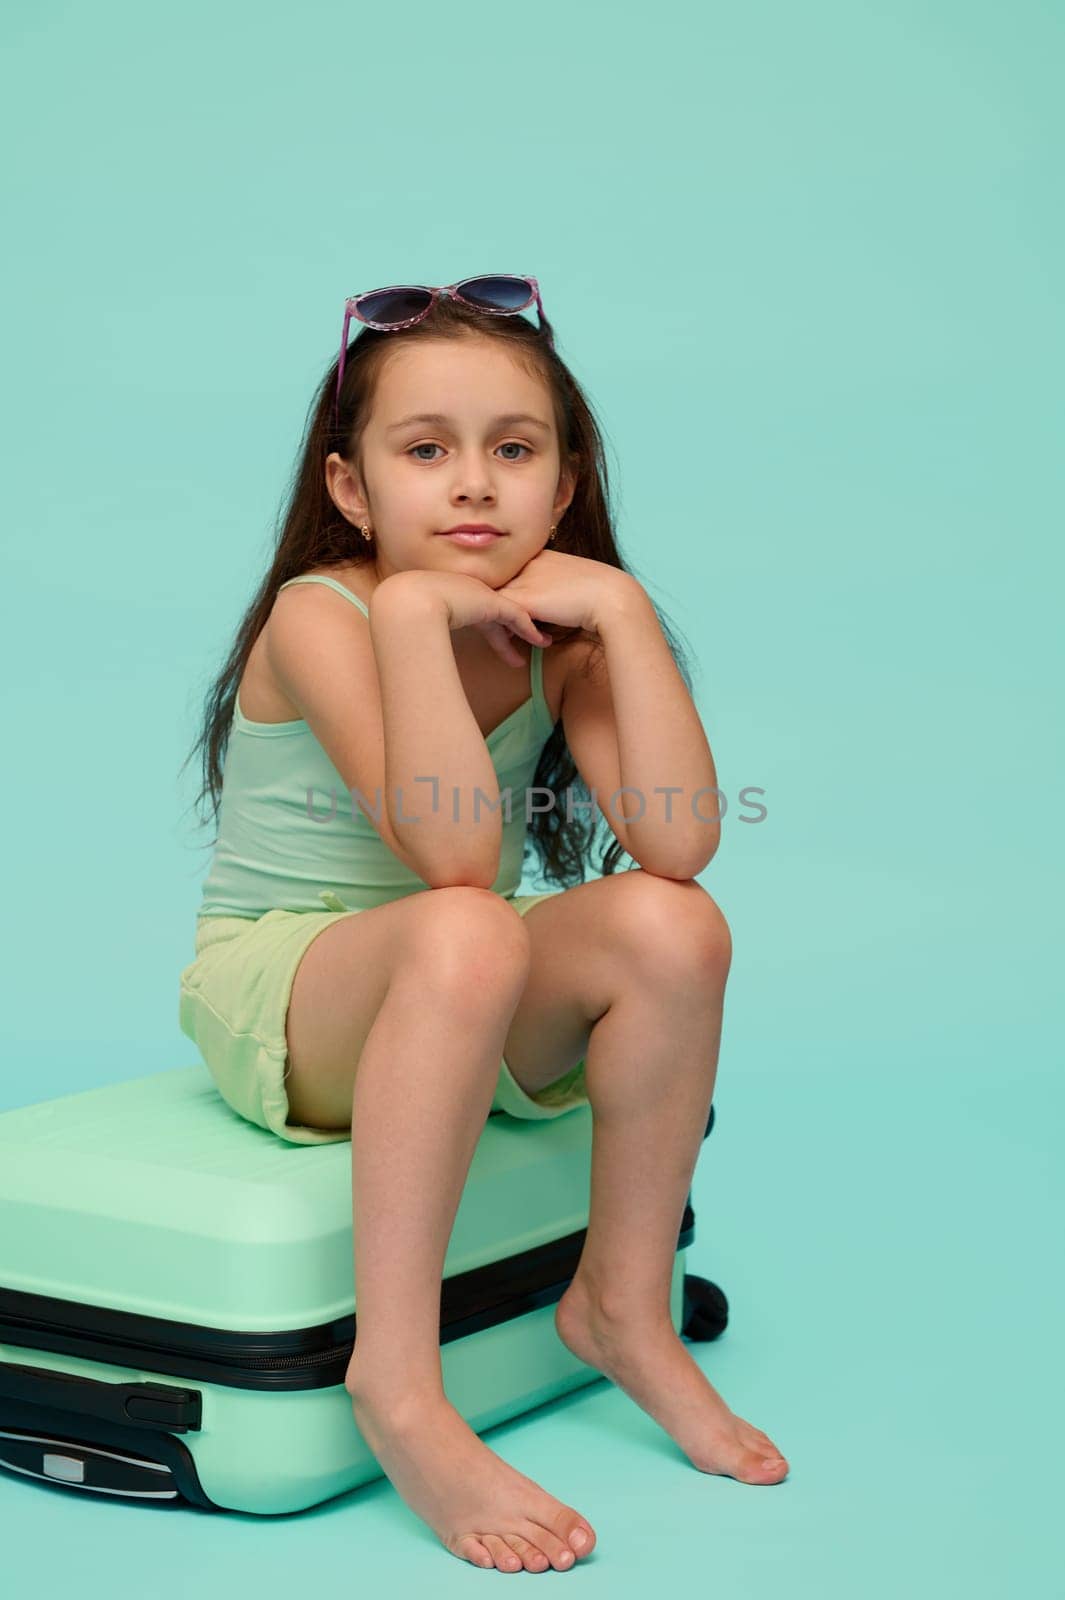 Adorable little kid girl in summer wear, sitting on a suitcase, smiling cutely looking at camera, isolated blue backdrop by artgf